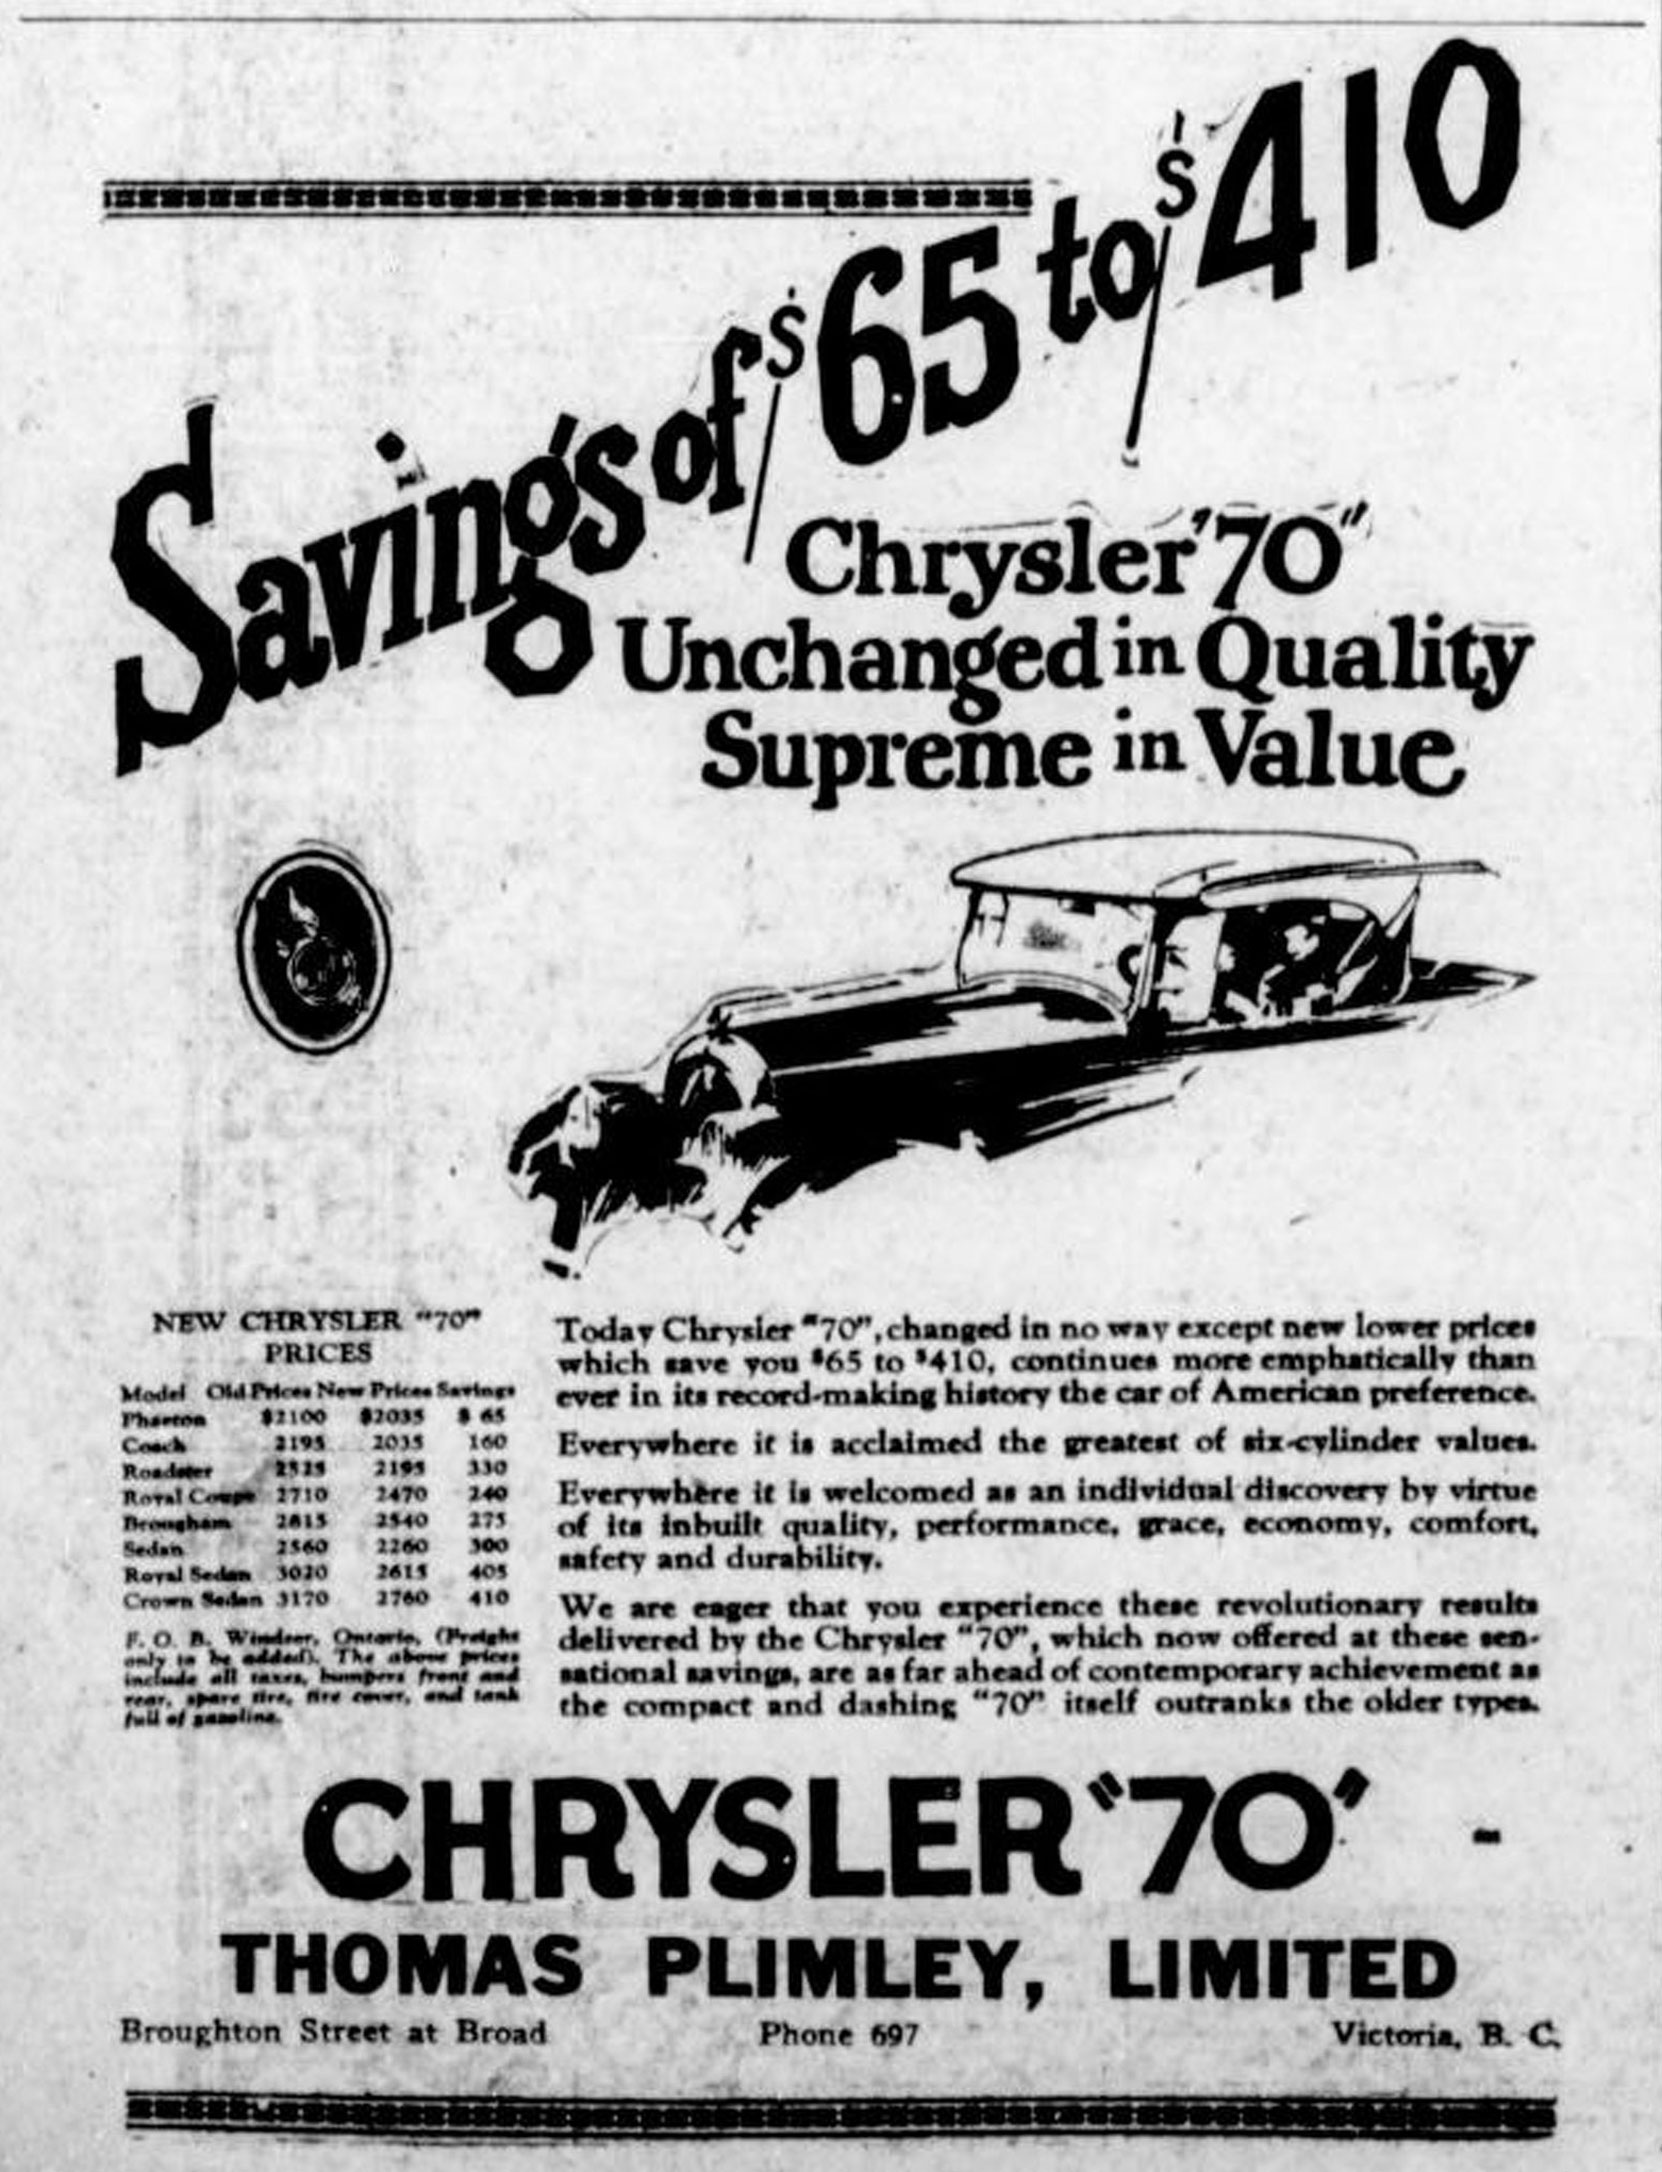 1926 advertisement for Chrysler "70" automobiles, placed by Thomas Plimley Ltd., Broughton Street at Broad Street, (Victoria Online Sightseeing Tours collection)